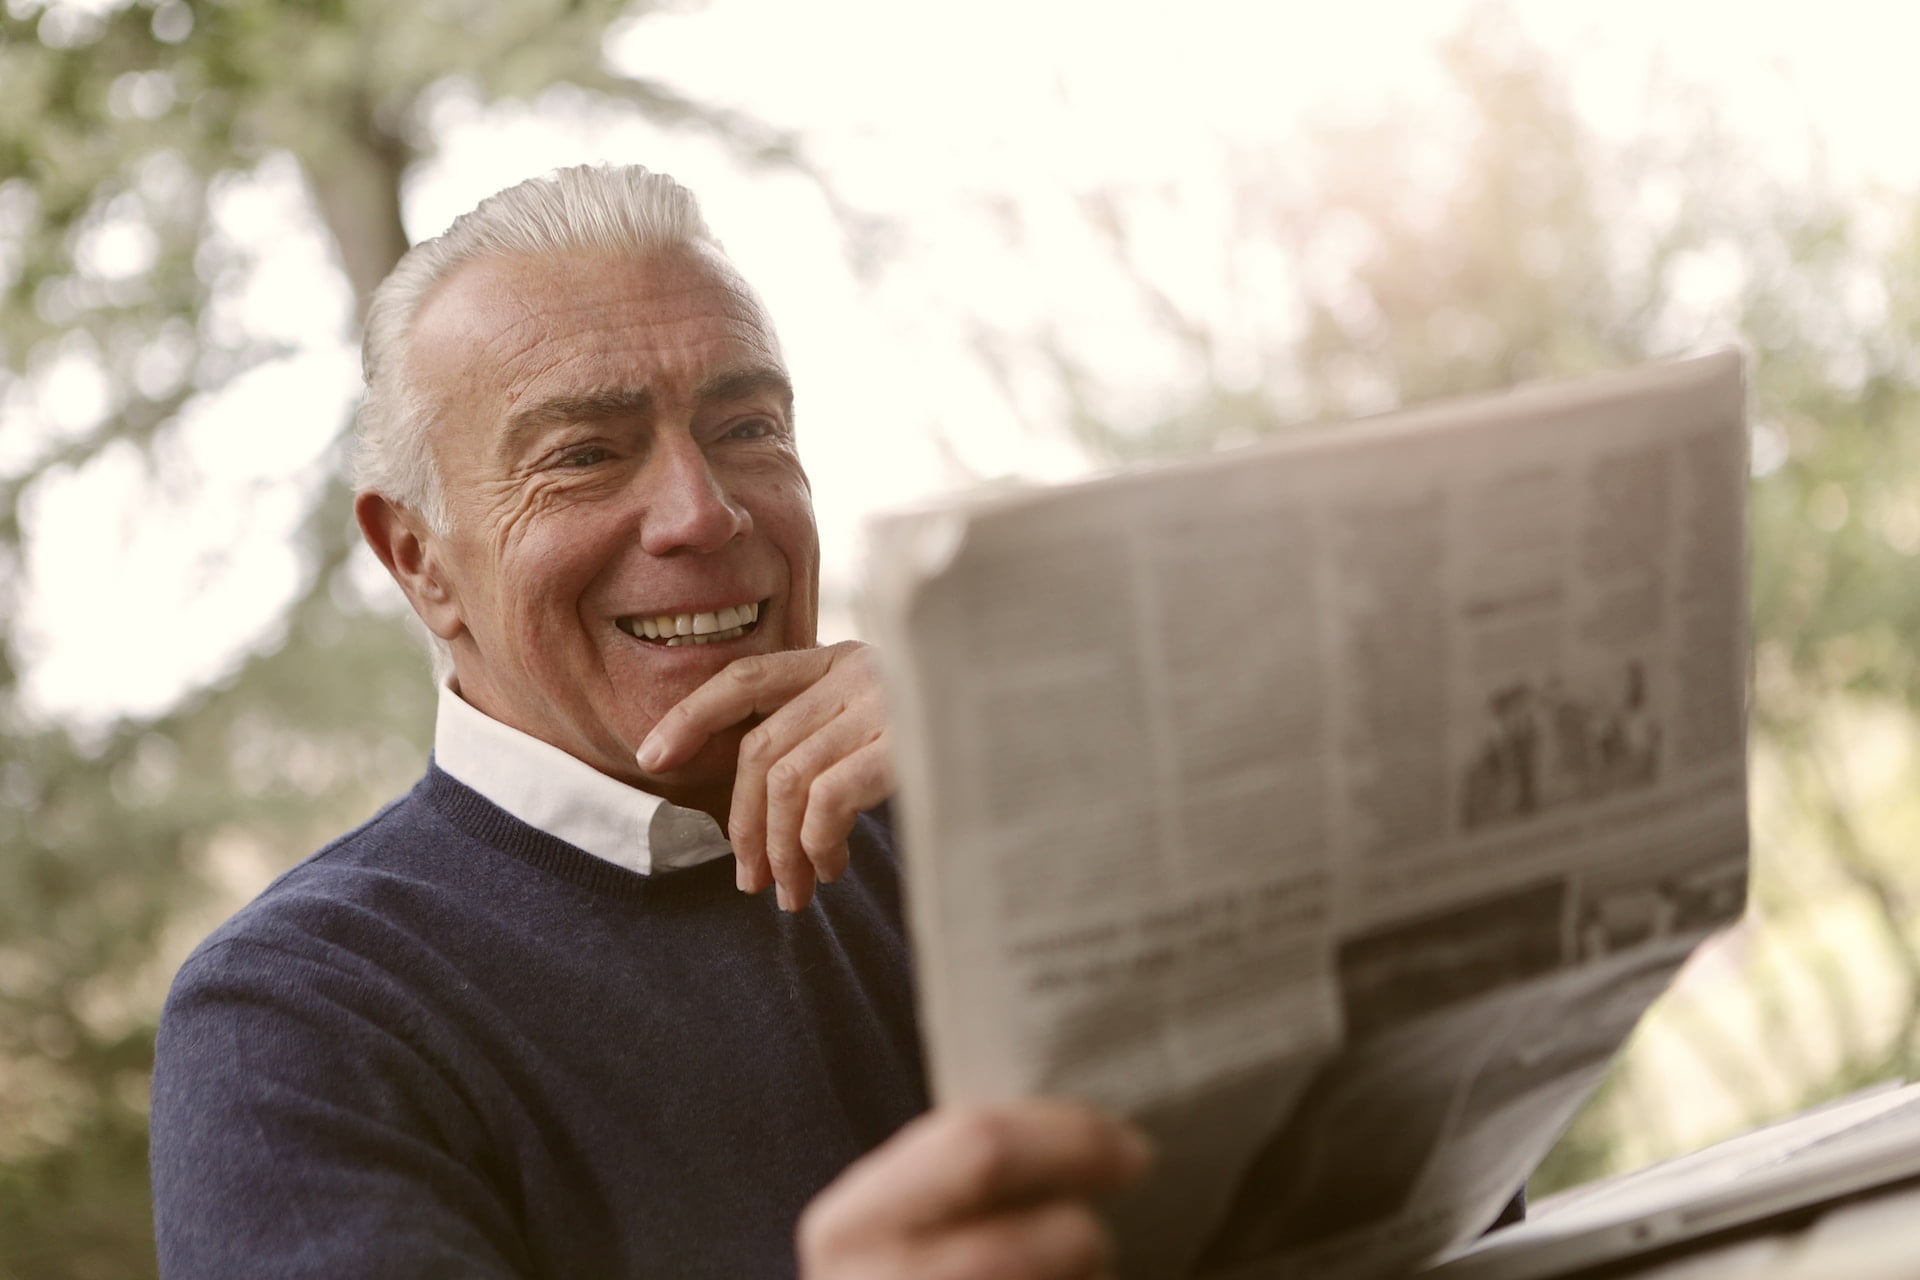 Depicts a man reading a newspaper outside. Used as a cover image for a roundup of alternative investment news.